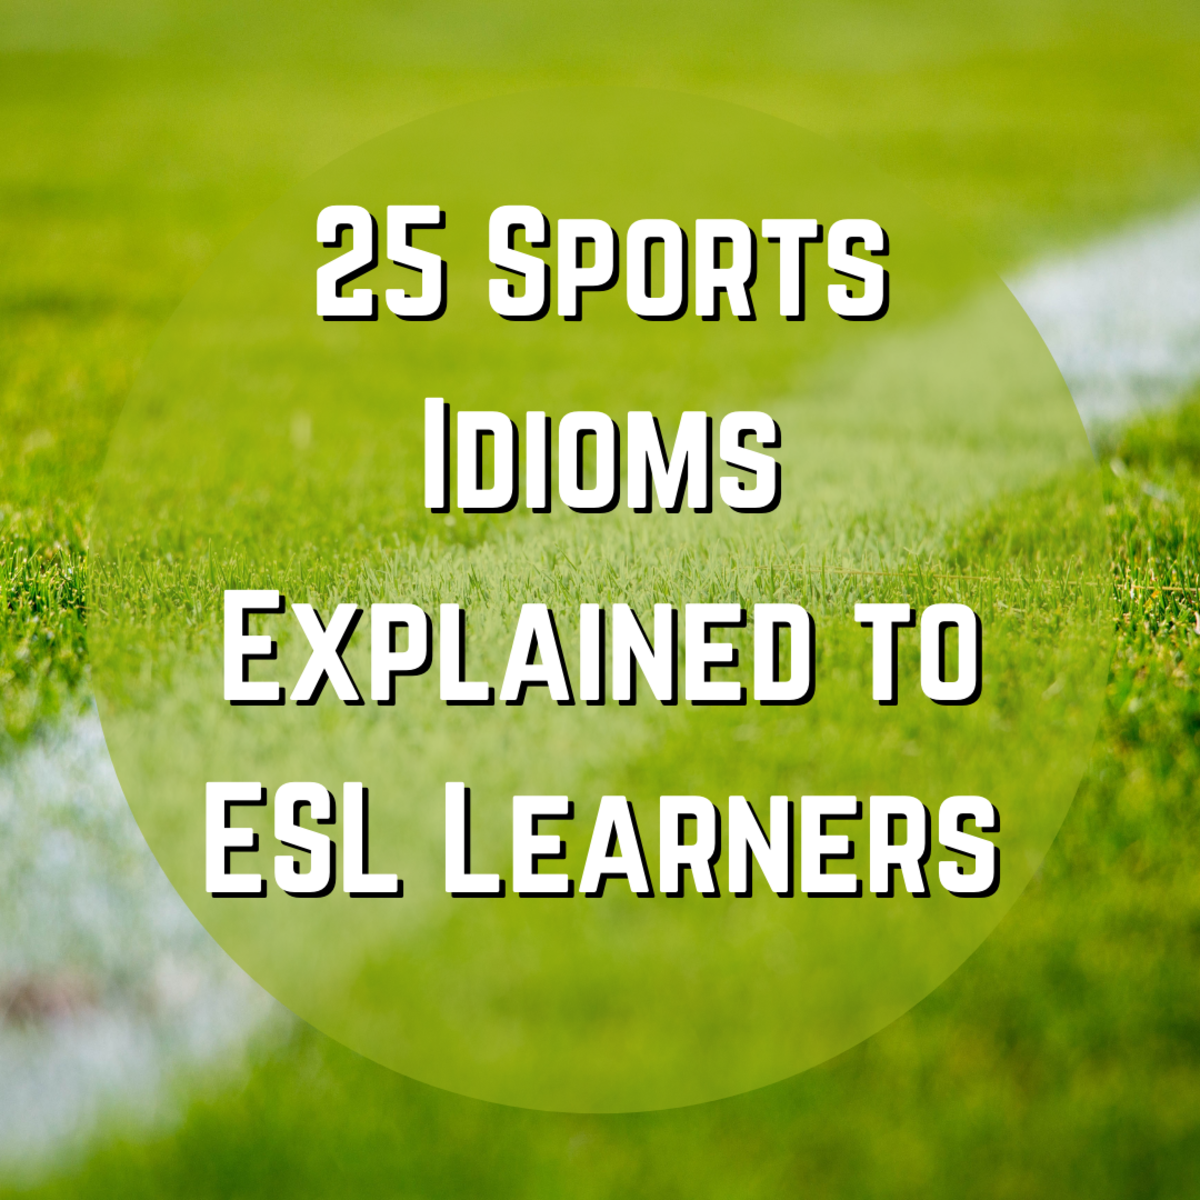 25 Sports Idioms Explained to ESL Learners